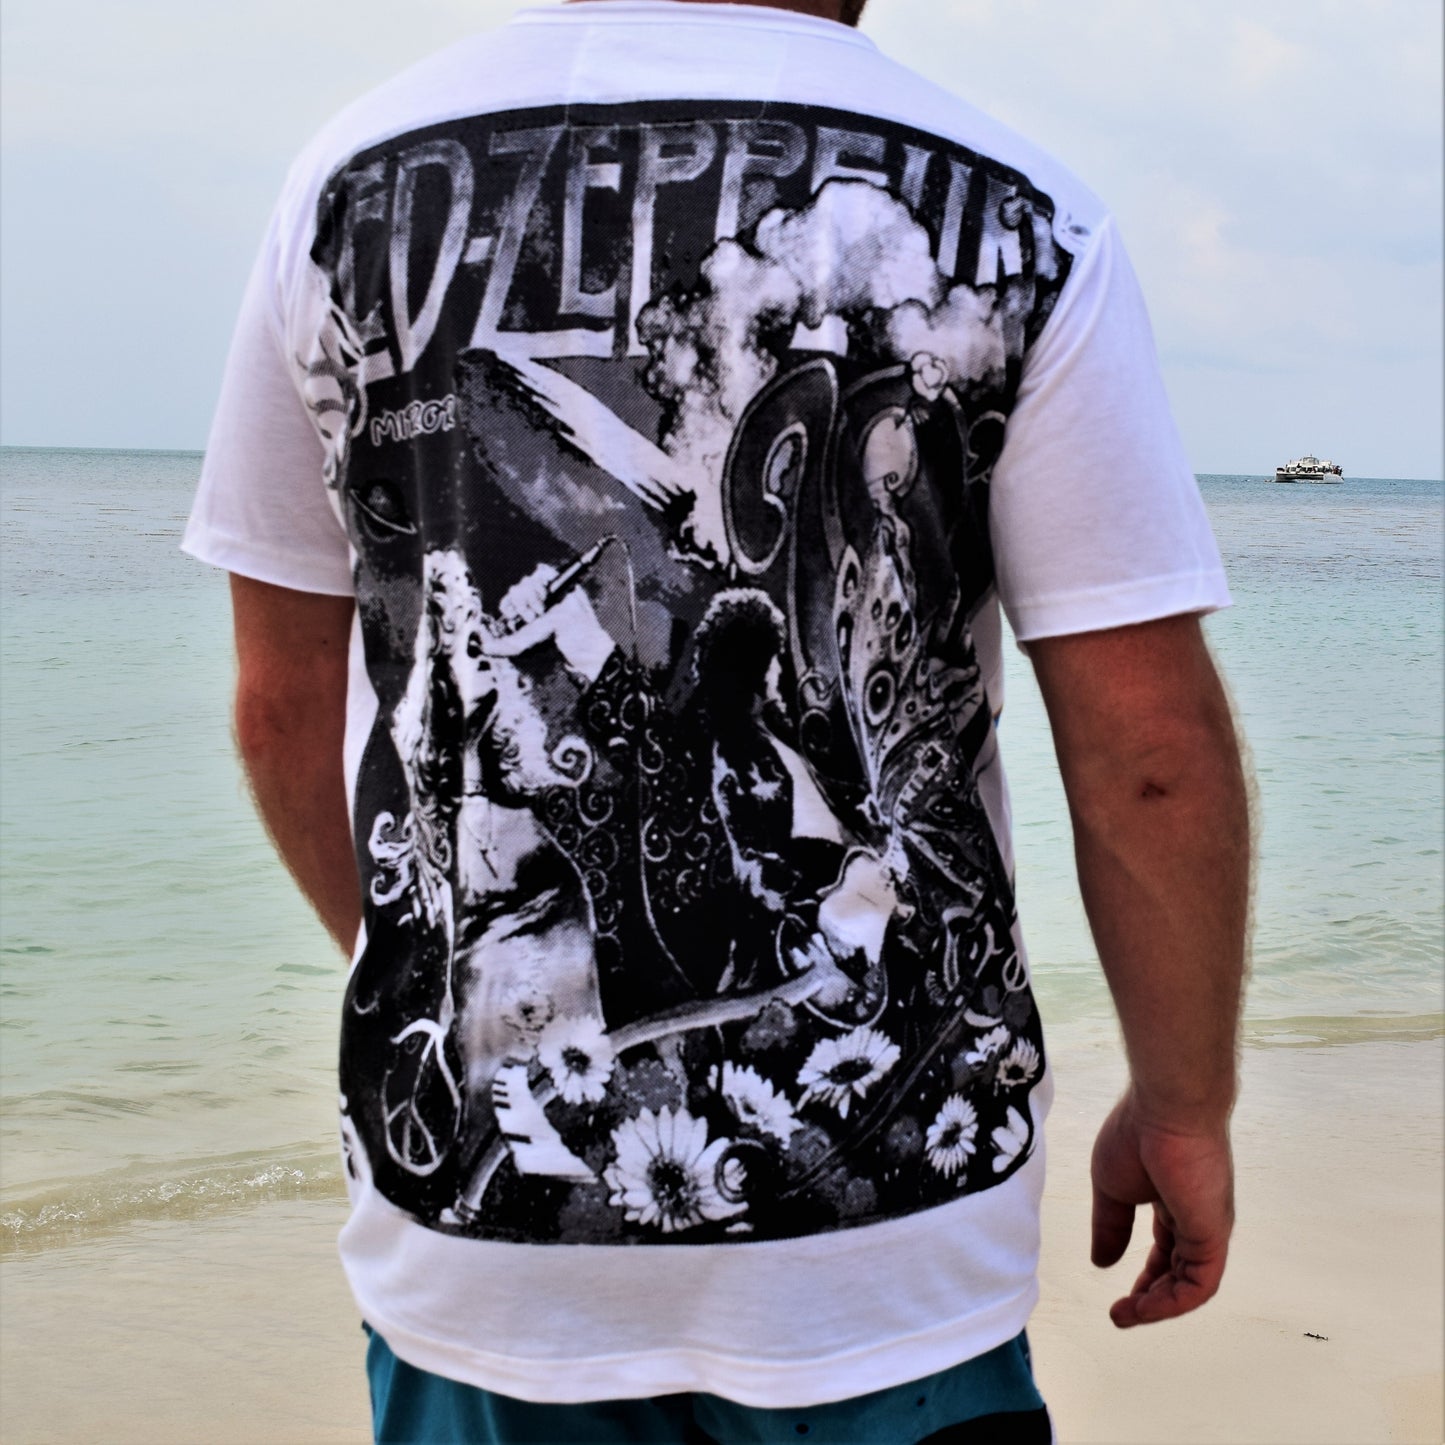 Led Zep 70" Men's T-shirt by Mirror Brand